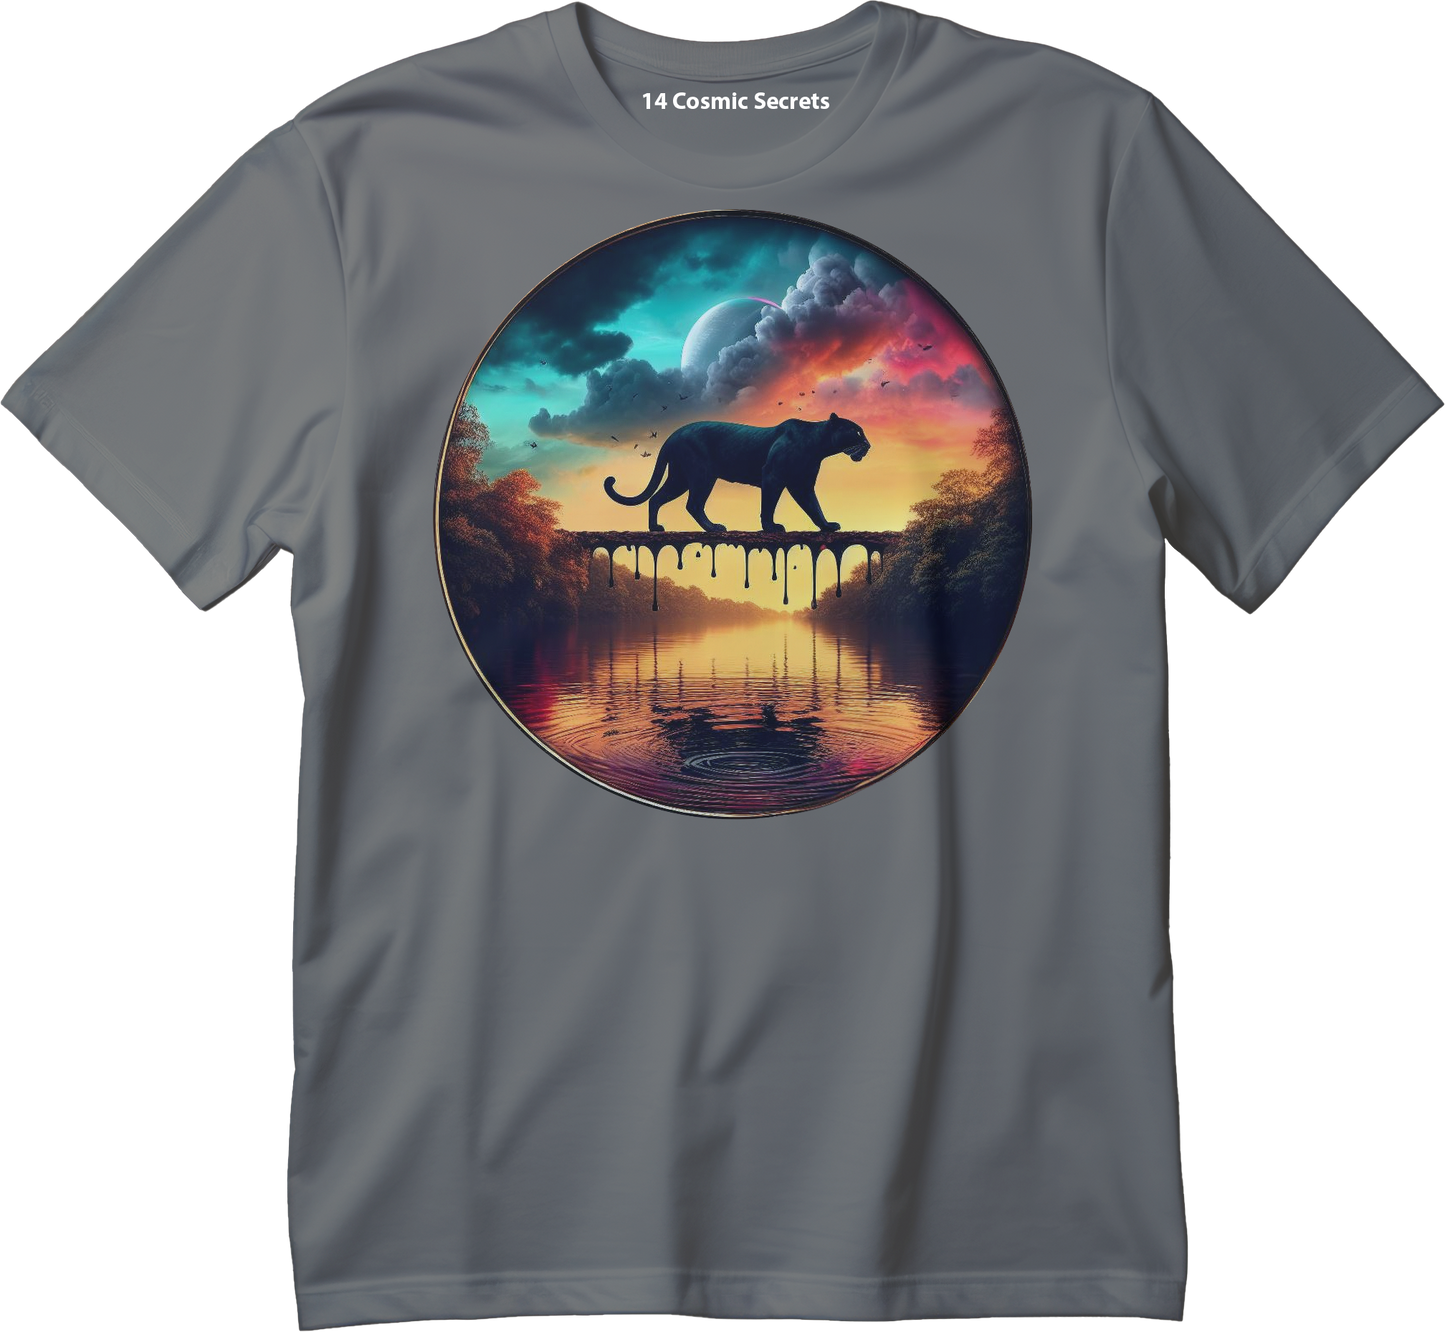 In Search of Prey Graphic Printed T-Shirt  Cotton T-Shirt Magnificence of India T-Shirt